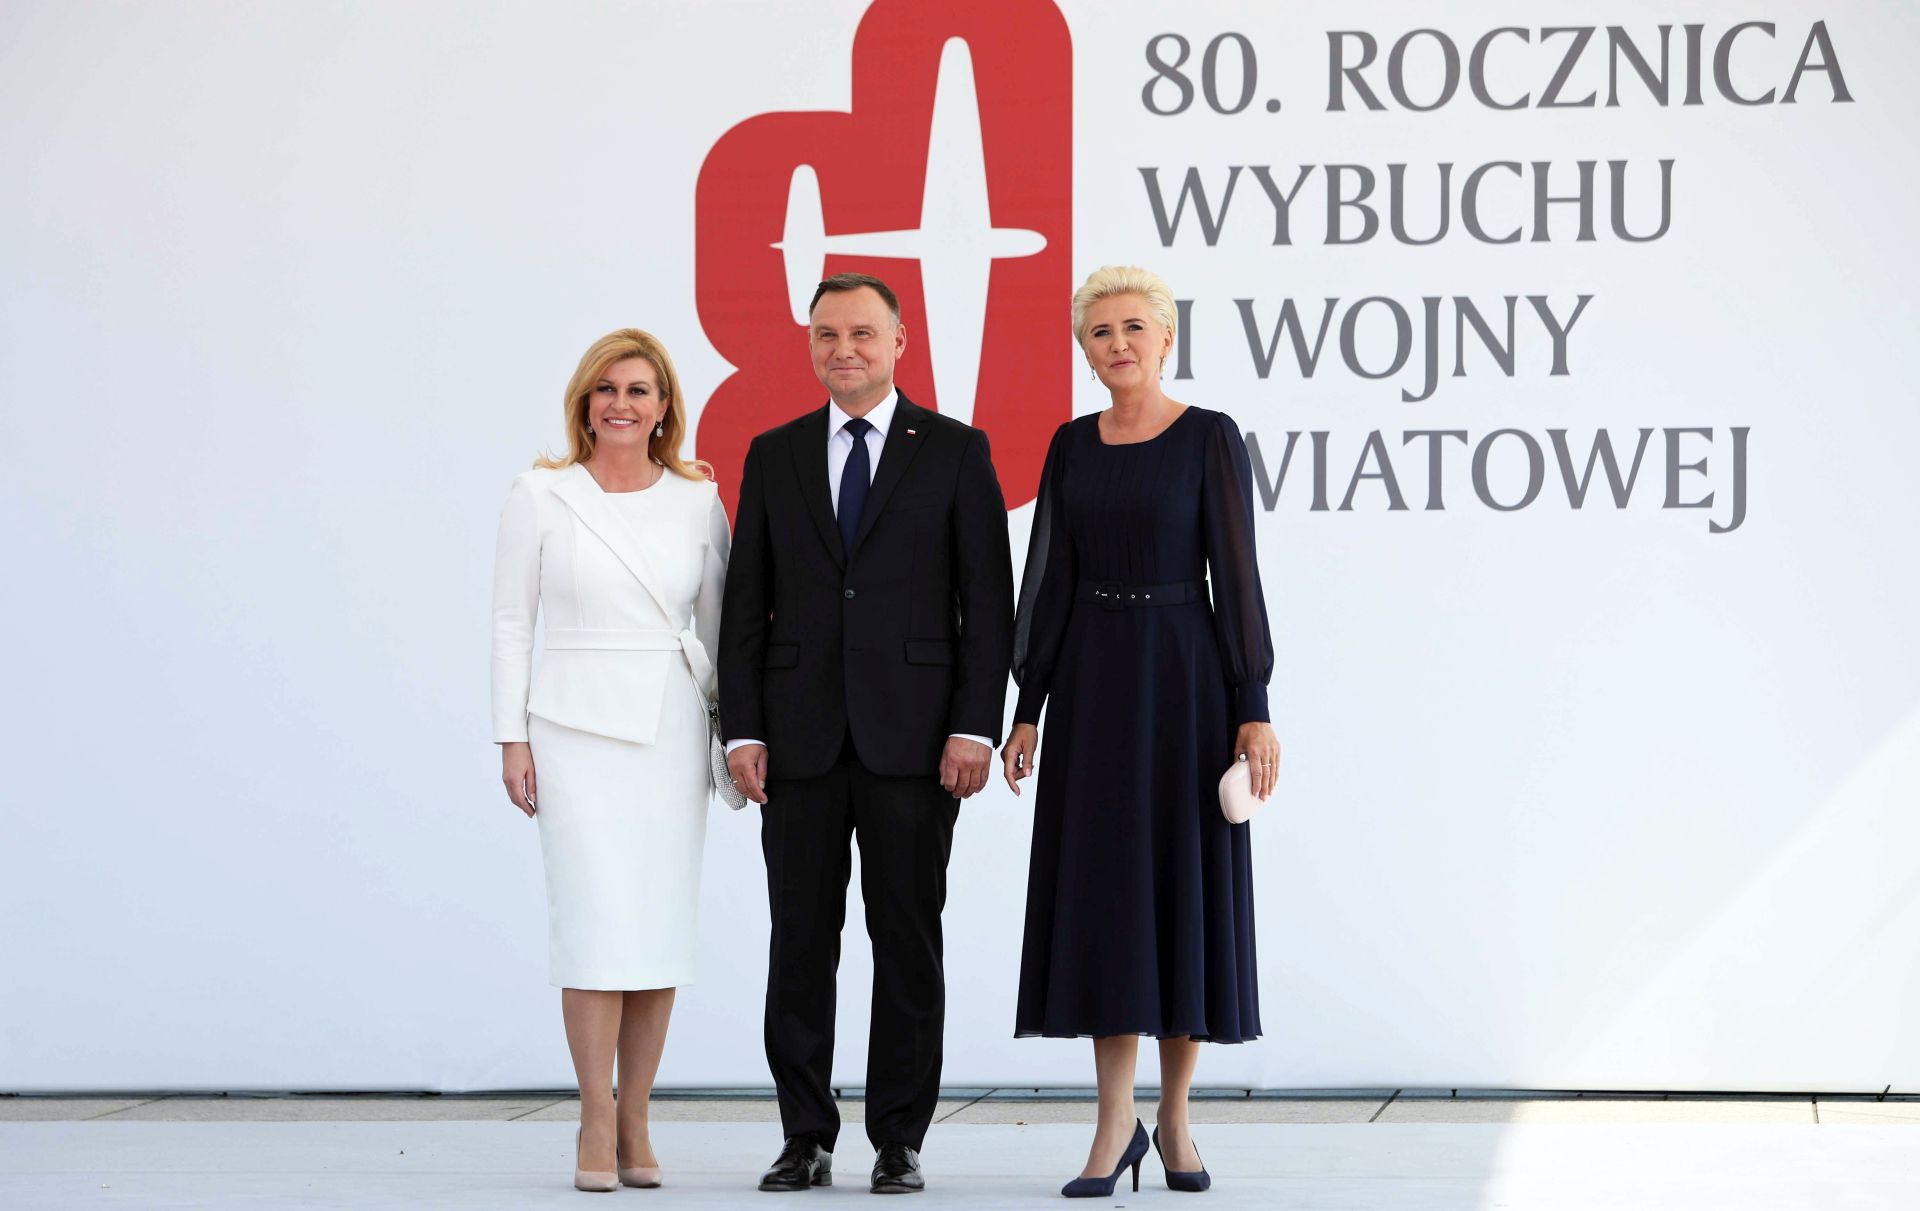 epa07809509 Polish President Andrzej Duda (C) and his wife Agata Kornhauser-Duda (R) welcome Croatian President Kolinda Grabar Kitarovic (L) during official welcome ceremony at the Jozef Pilsudski Square for the ceremony marking 80th anniversary of World War II outbreak in Warsaw, Poland, 01 September 2019. The Luftwaffe attack on the Polish city of Wielun in the early morning of 01 September 1939 marked the beginning of World War II. A few minutes later, the German battleship SMS Schleswig-Holstein bombarded the Gdansk Westerplatte.  EPA/LESZEK SZYMANSKI POLAND OUT